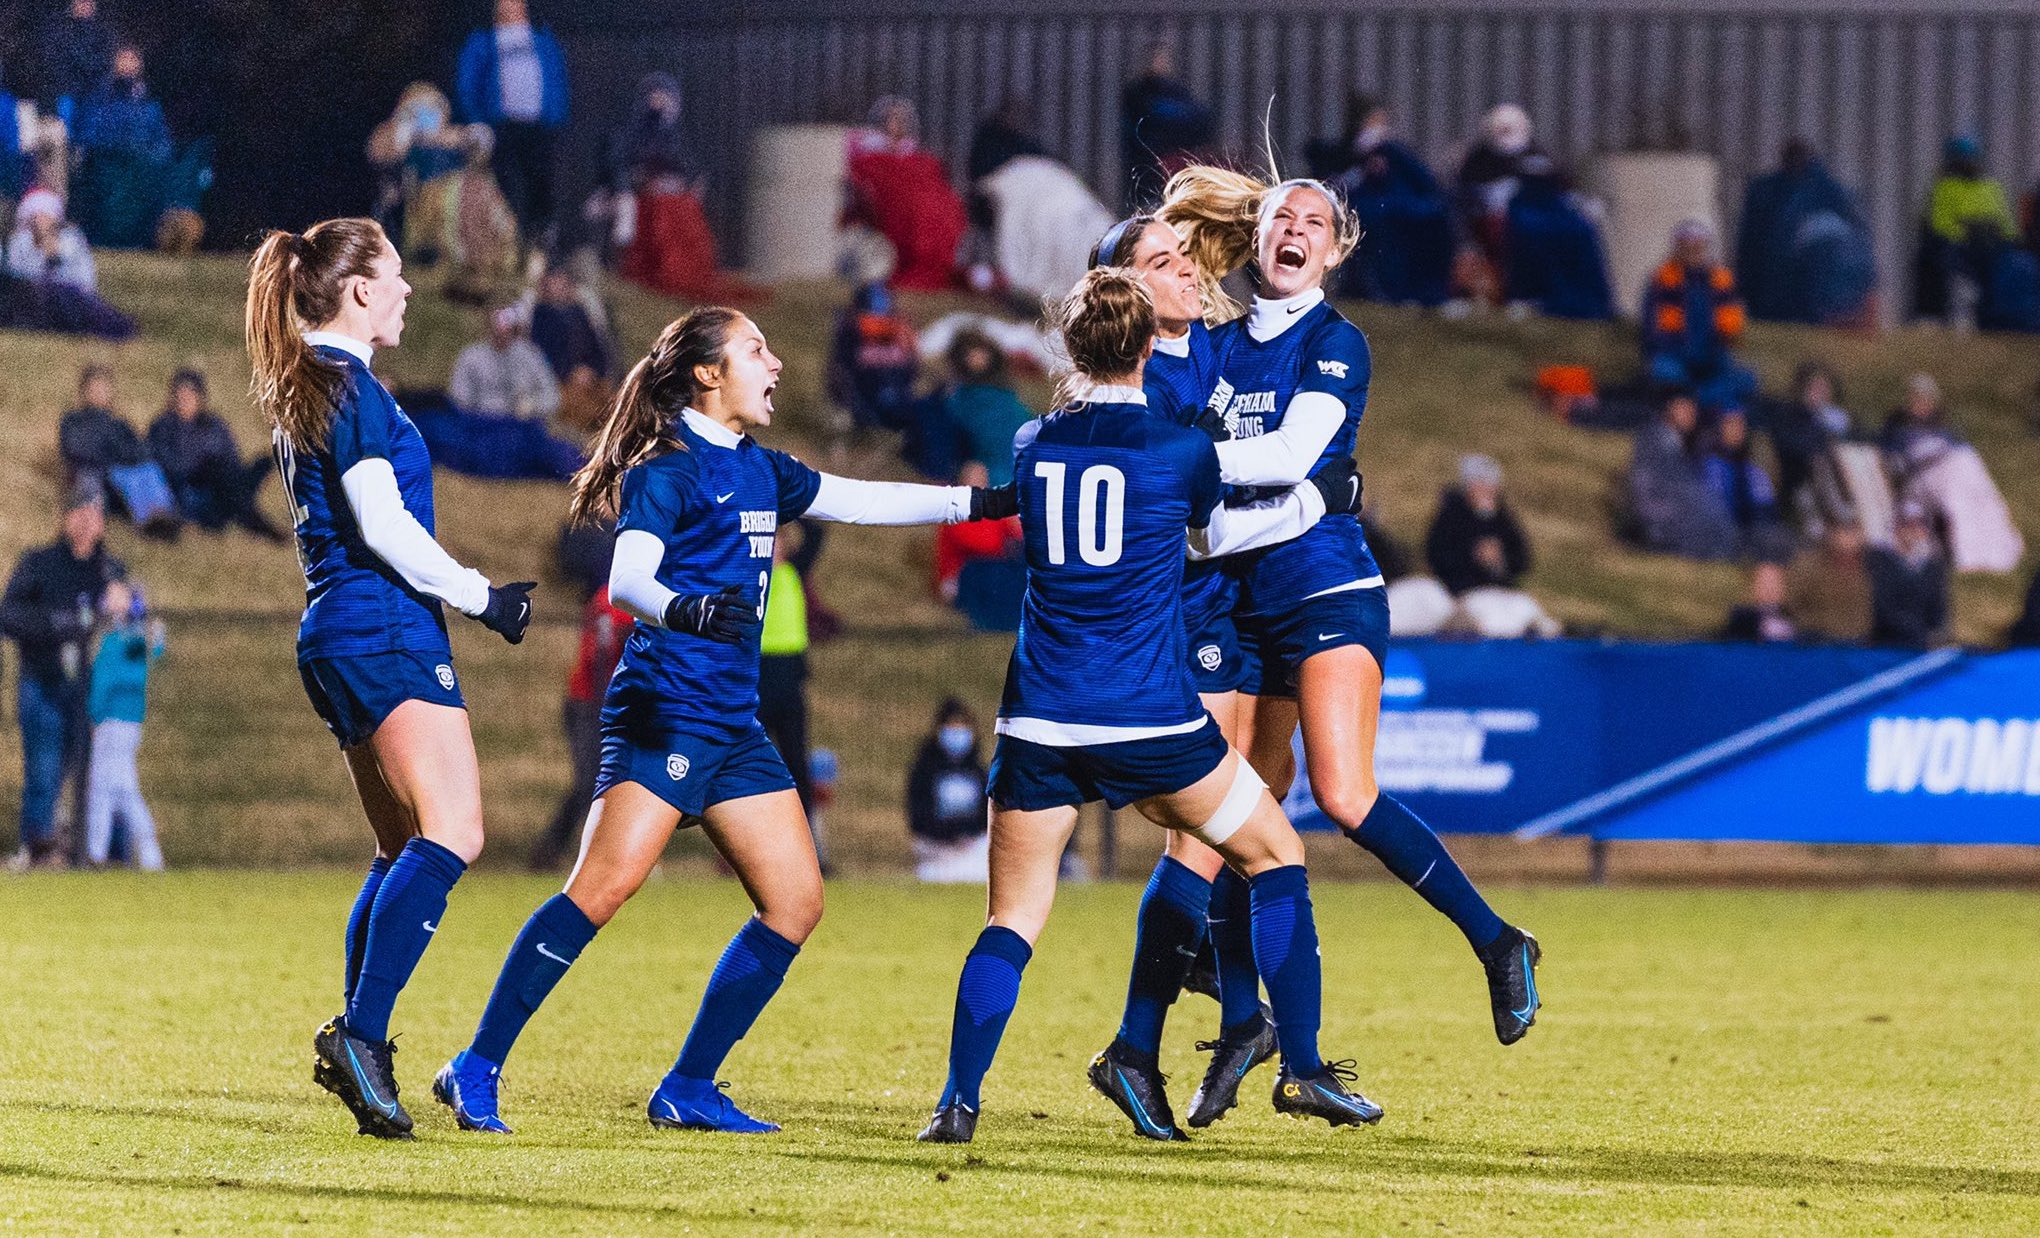 Byu Women S Soccer Advances To Elite With Upset Over Seed Virginia